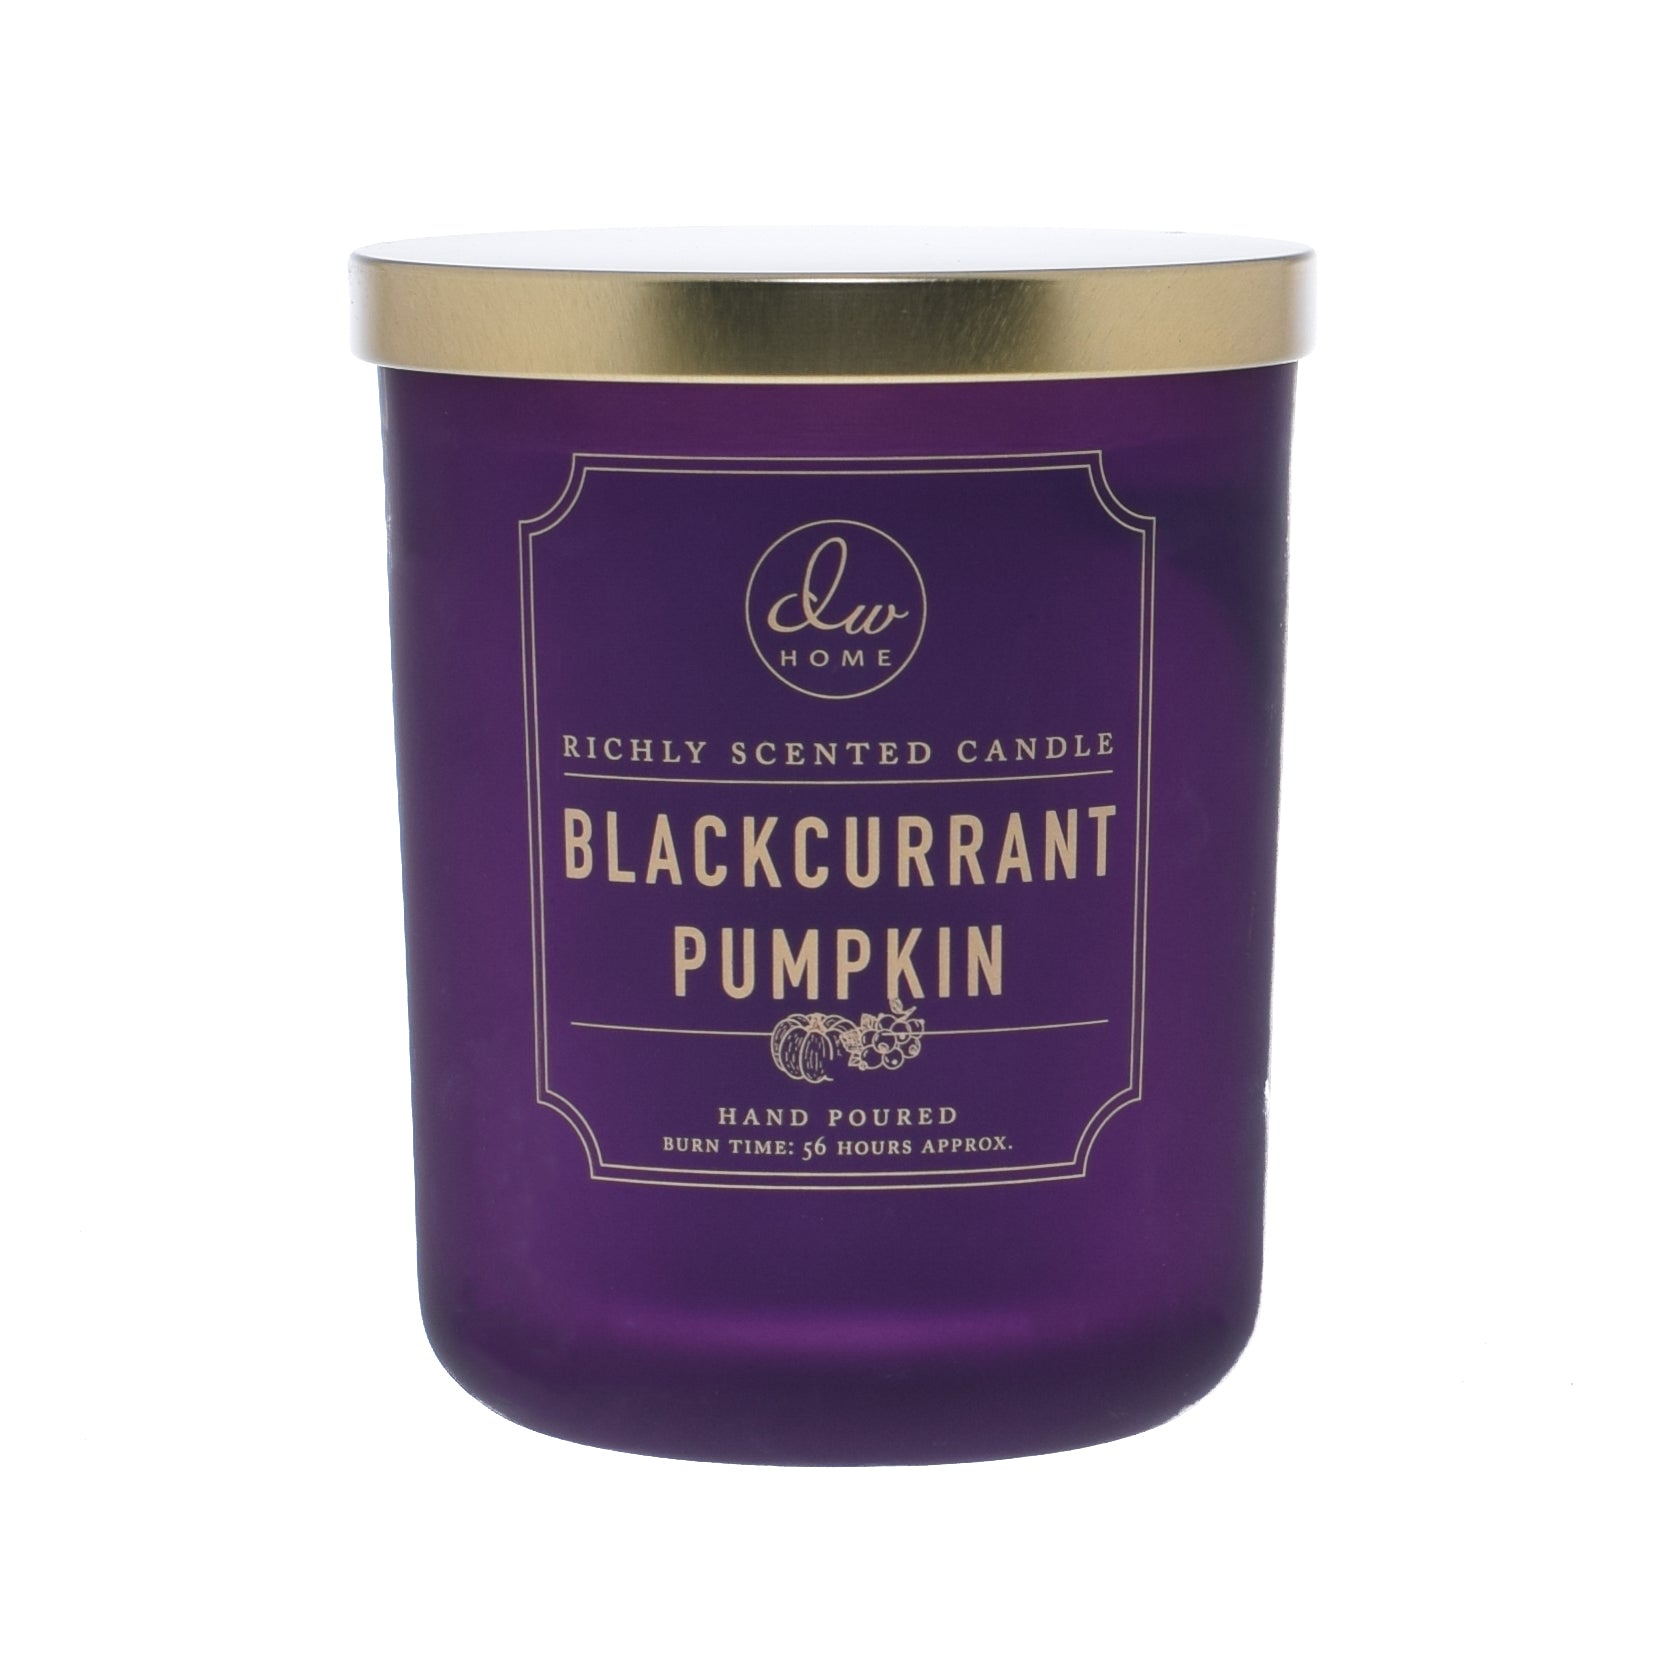  H RICHLY SCENTED CANDLE S RN BLACKCURRANTH l M A0 